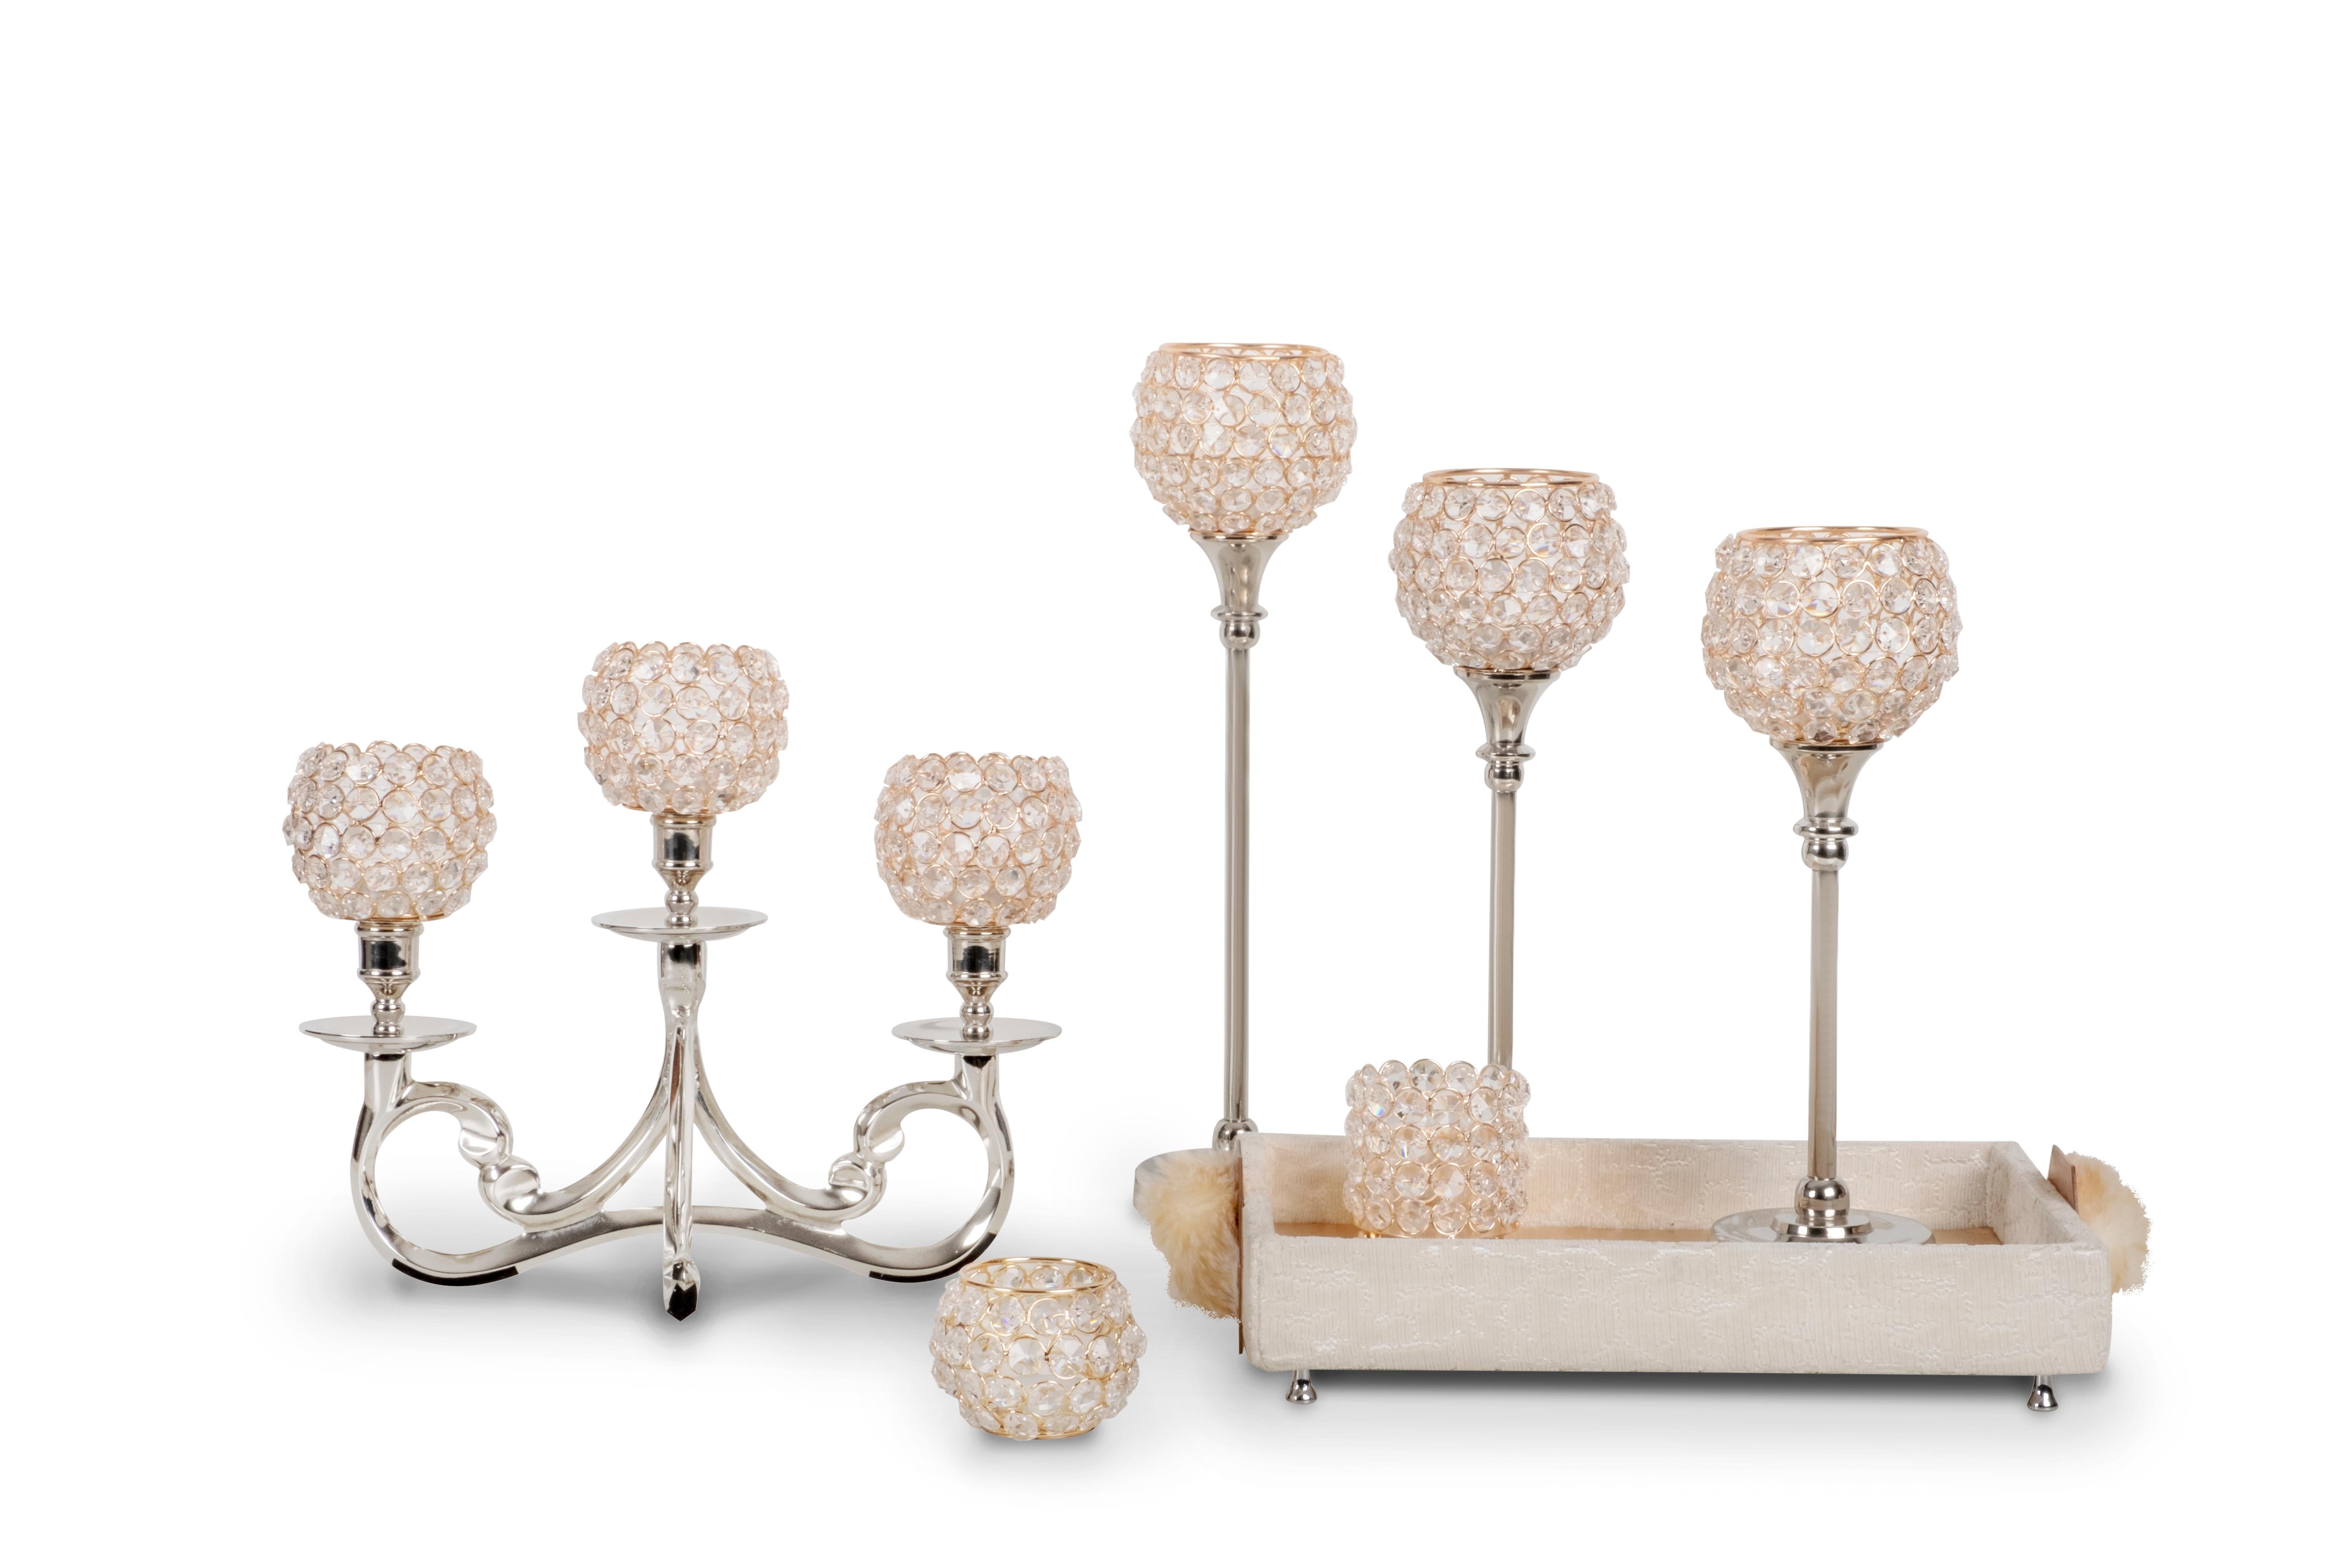 Contemporary Set/7 Decorative Candleholders & Tray, Rose Gold, Handmade by Lusitanus Home For Sale